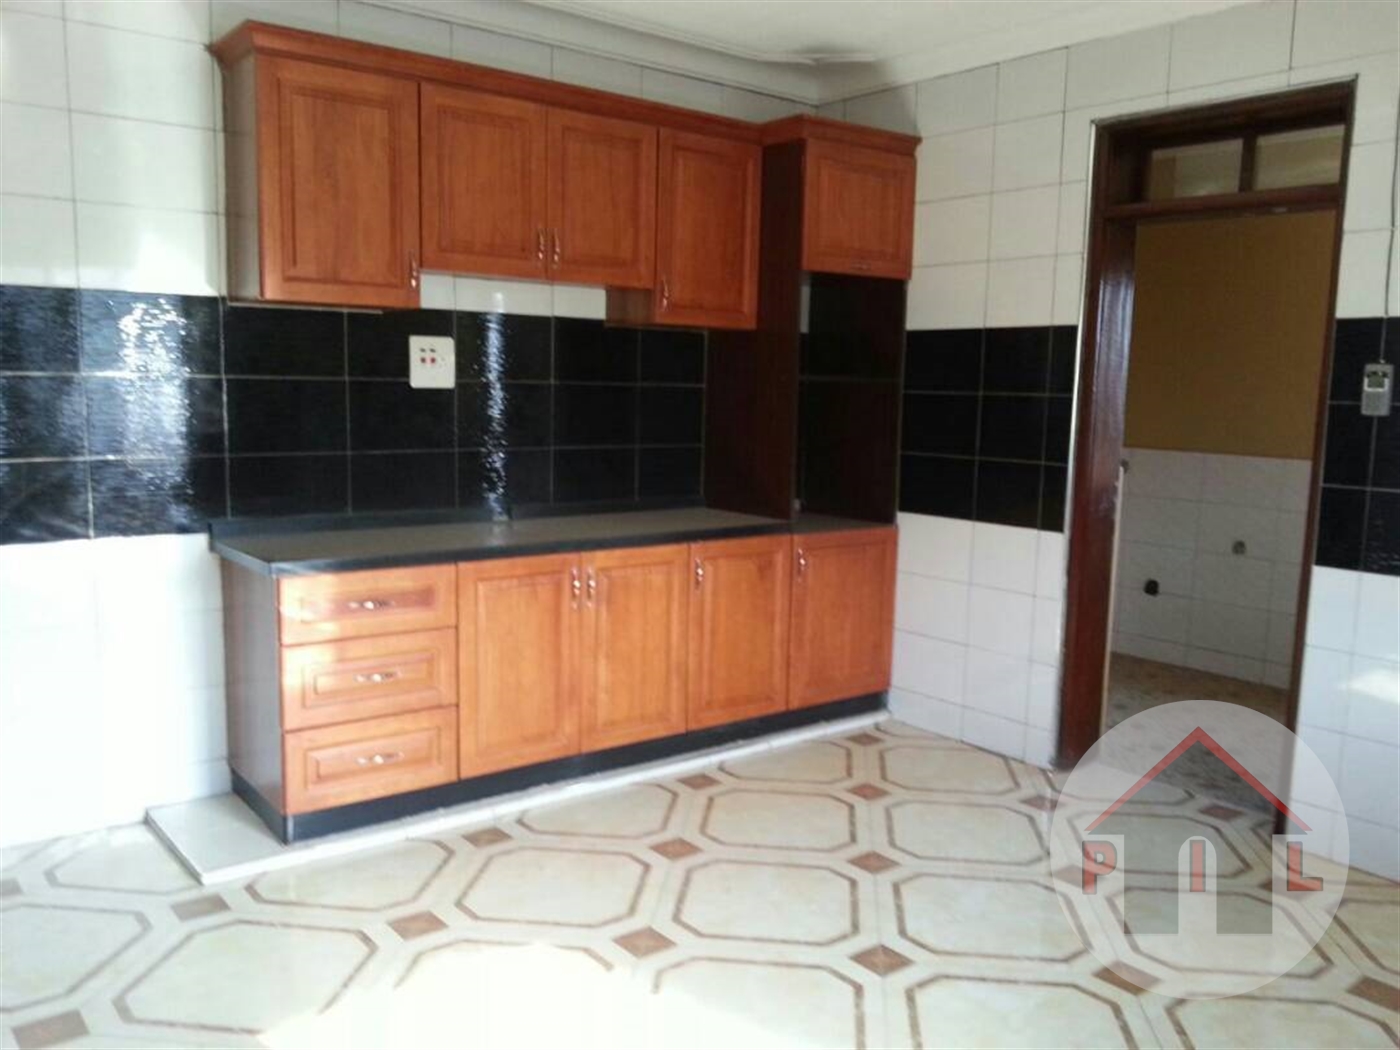 Mansion for sale in Lubowa Kampala